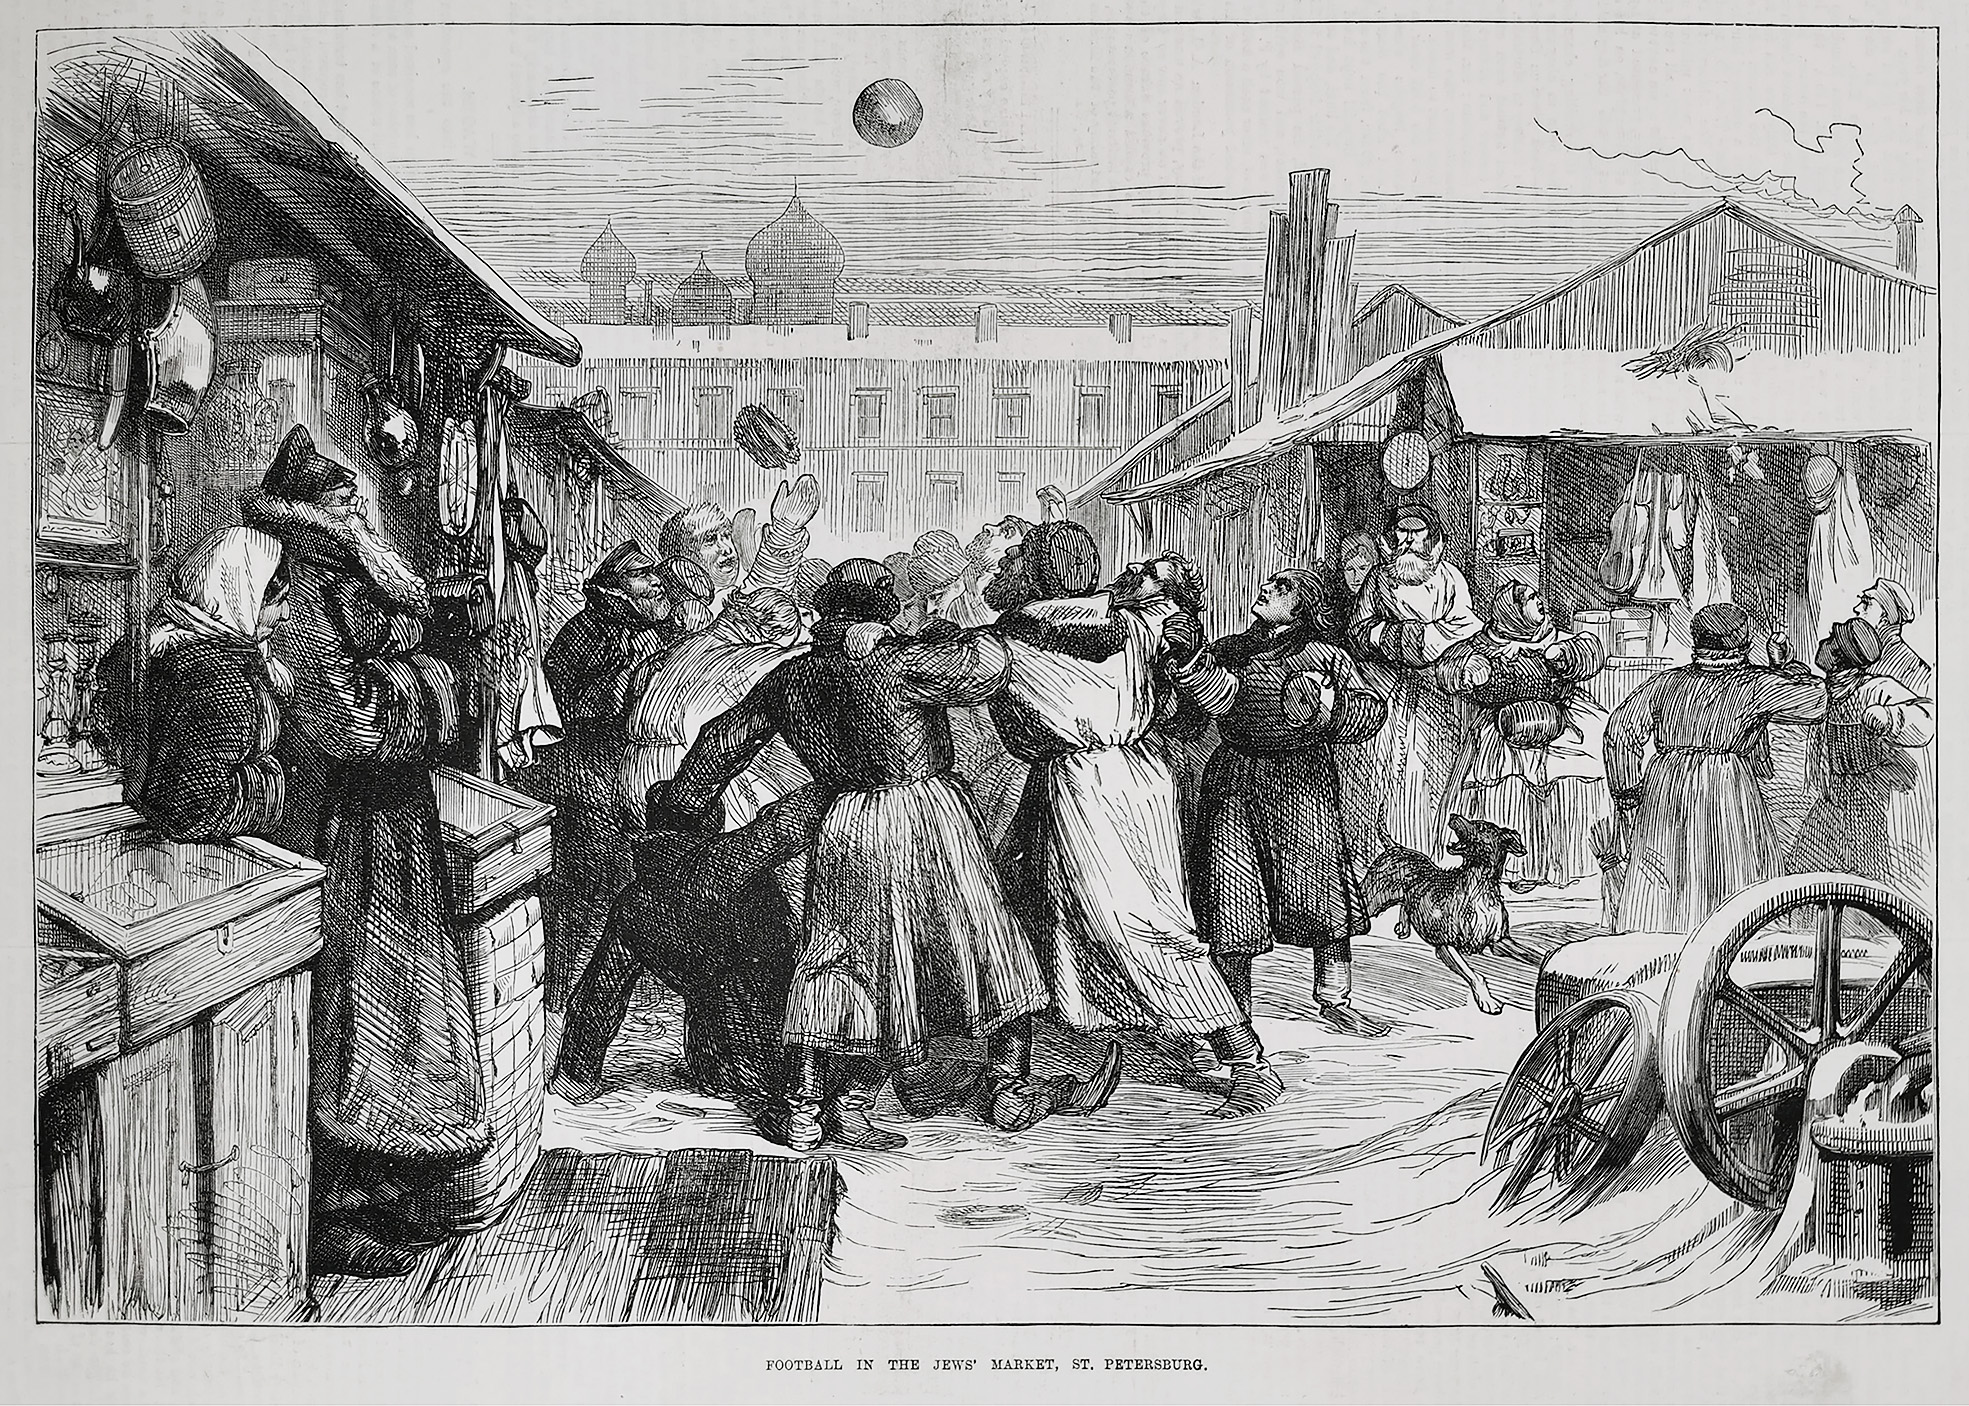 Football in the Jews' Market, St Petersburg. - Antique Print from 1874